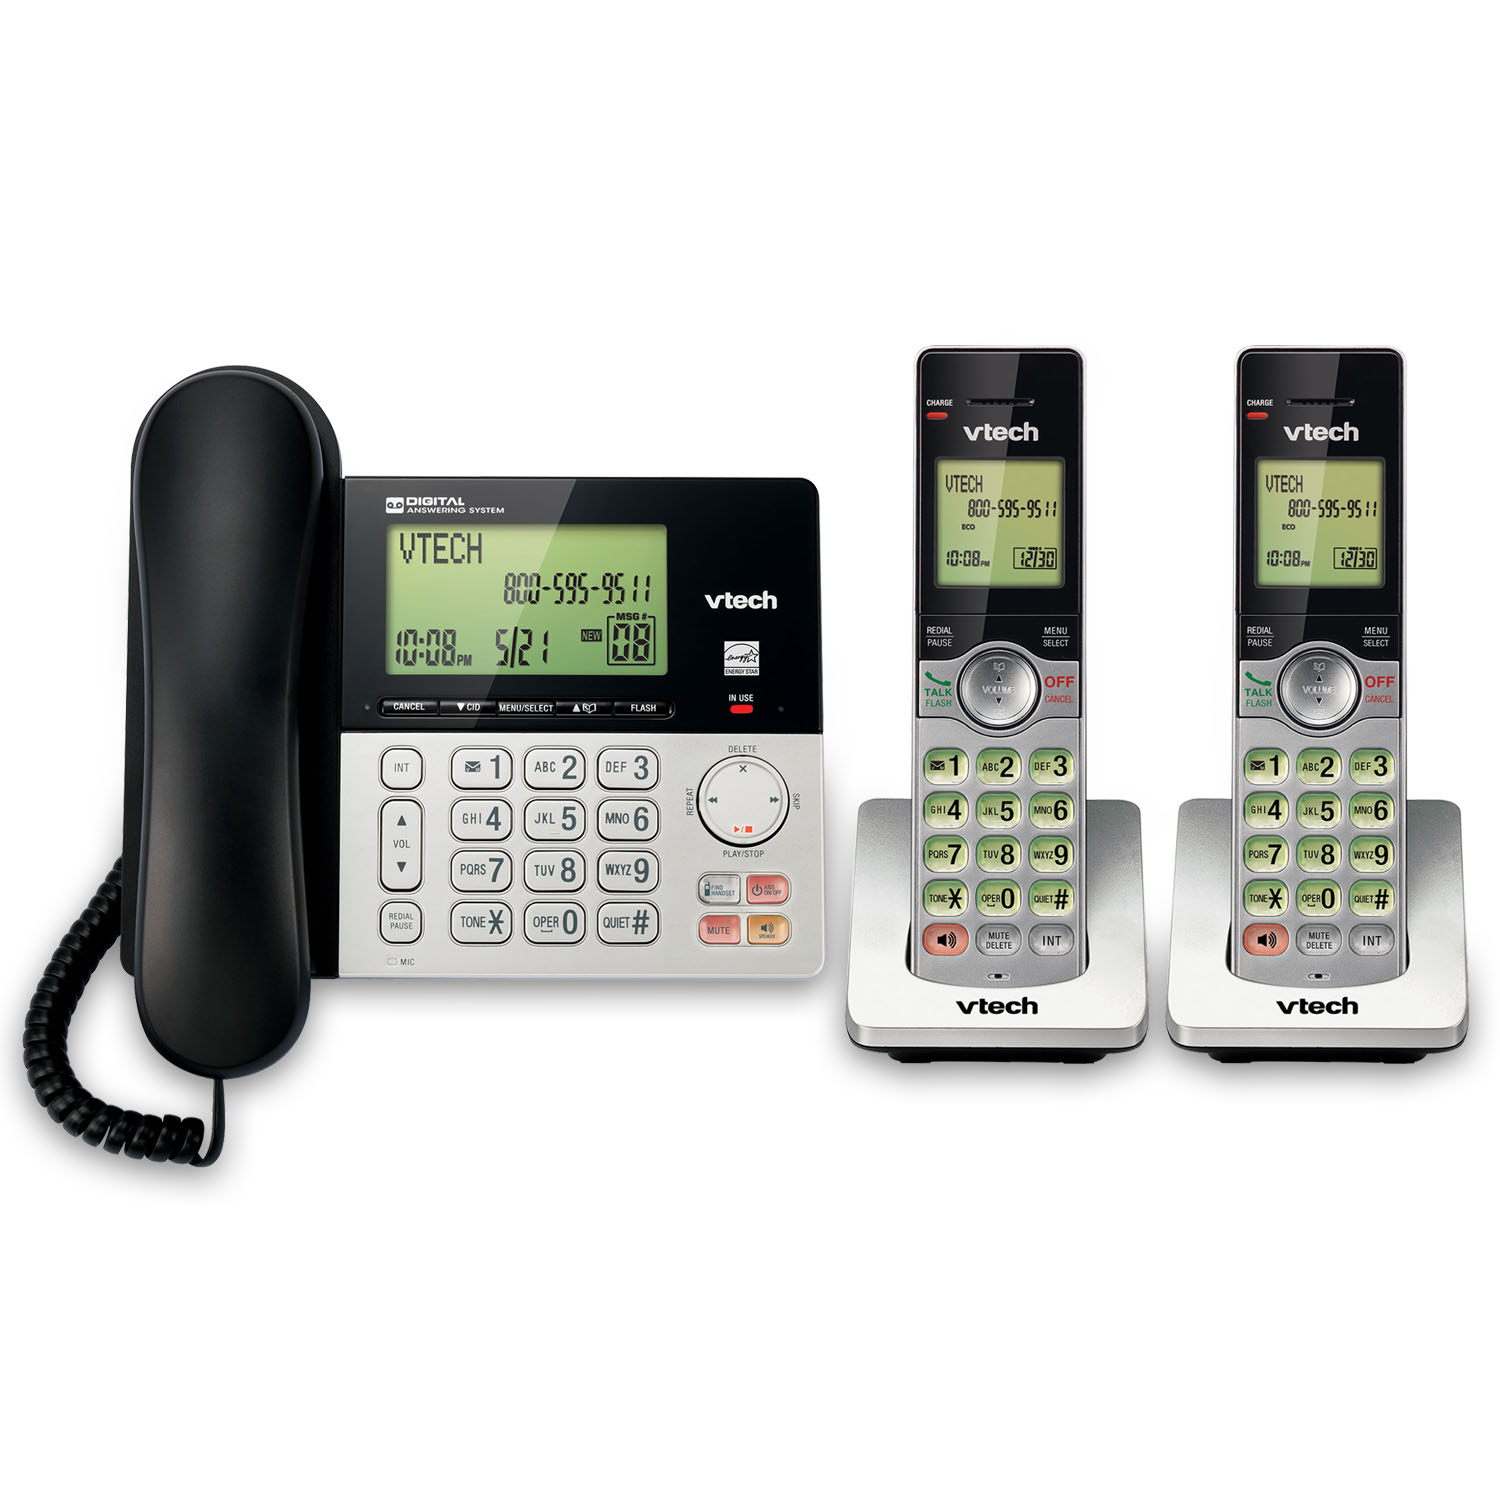 2 Handset Corded/Cordless Answering System with Caller ID/Call Waiting